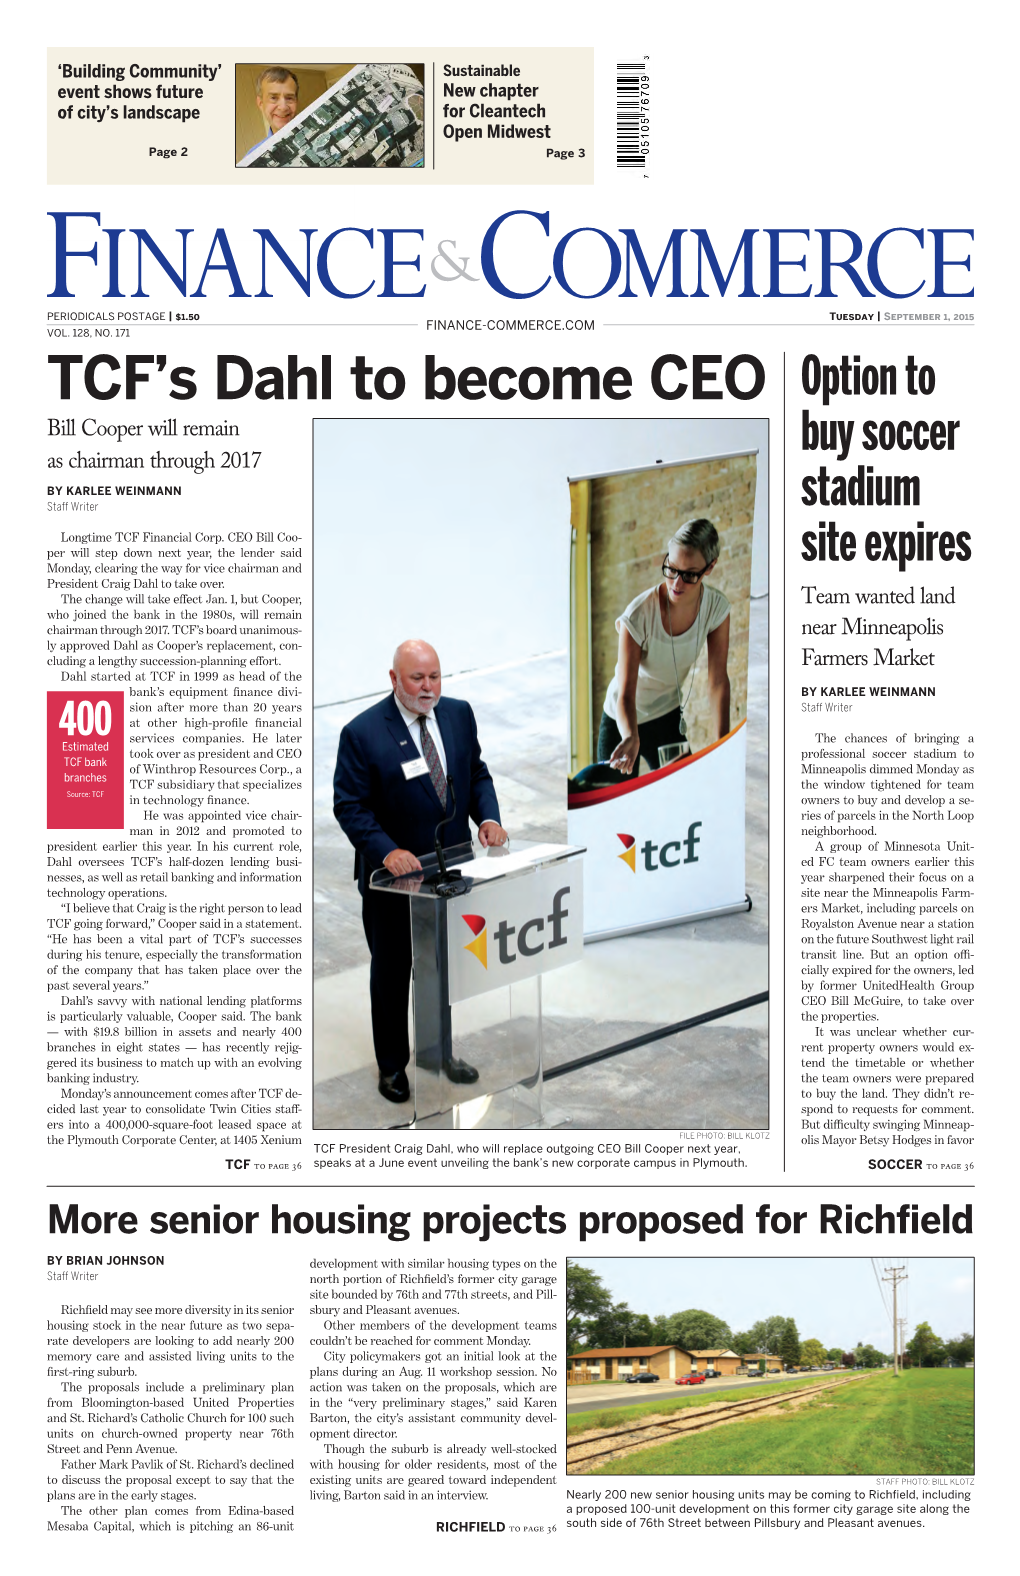 TCF's Dahl to Become